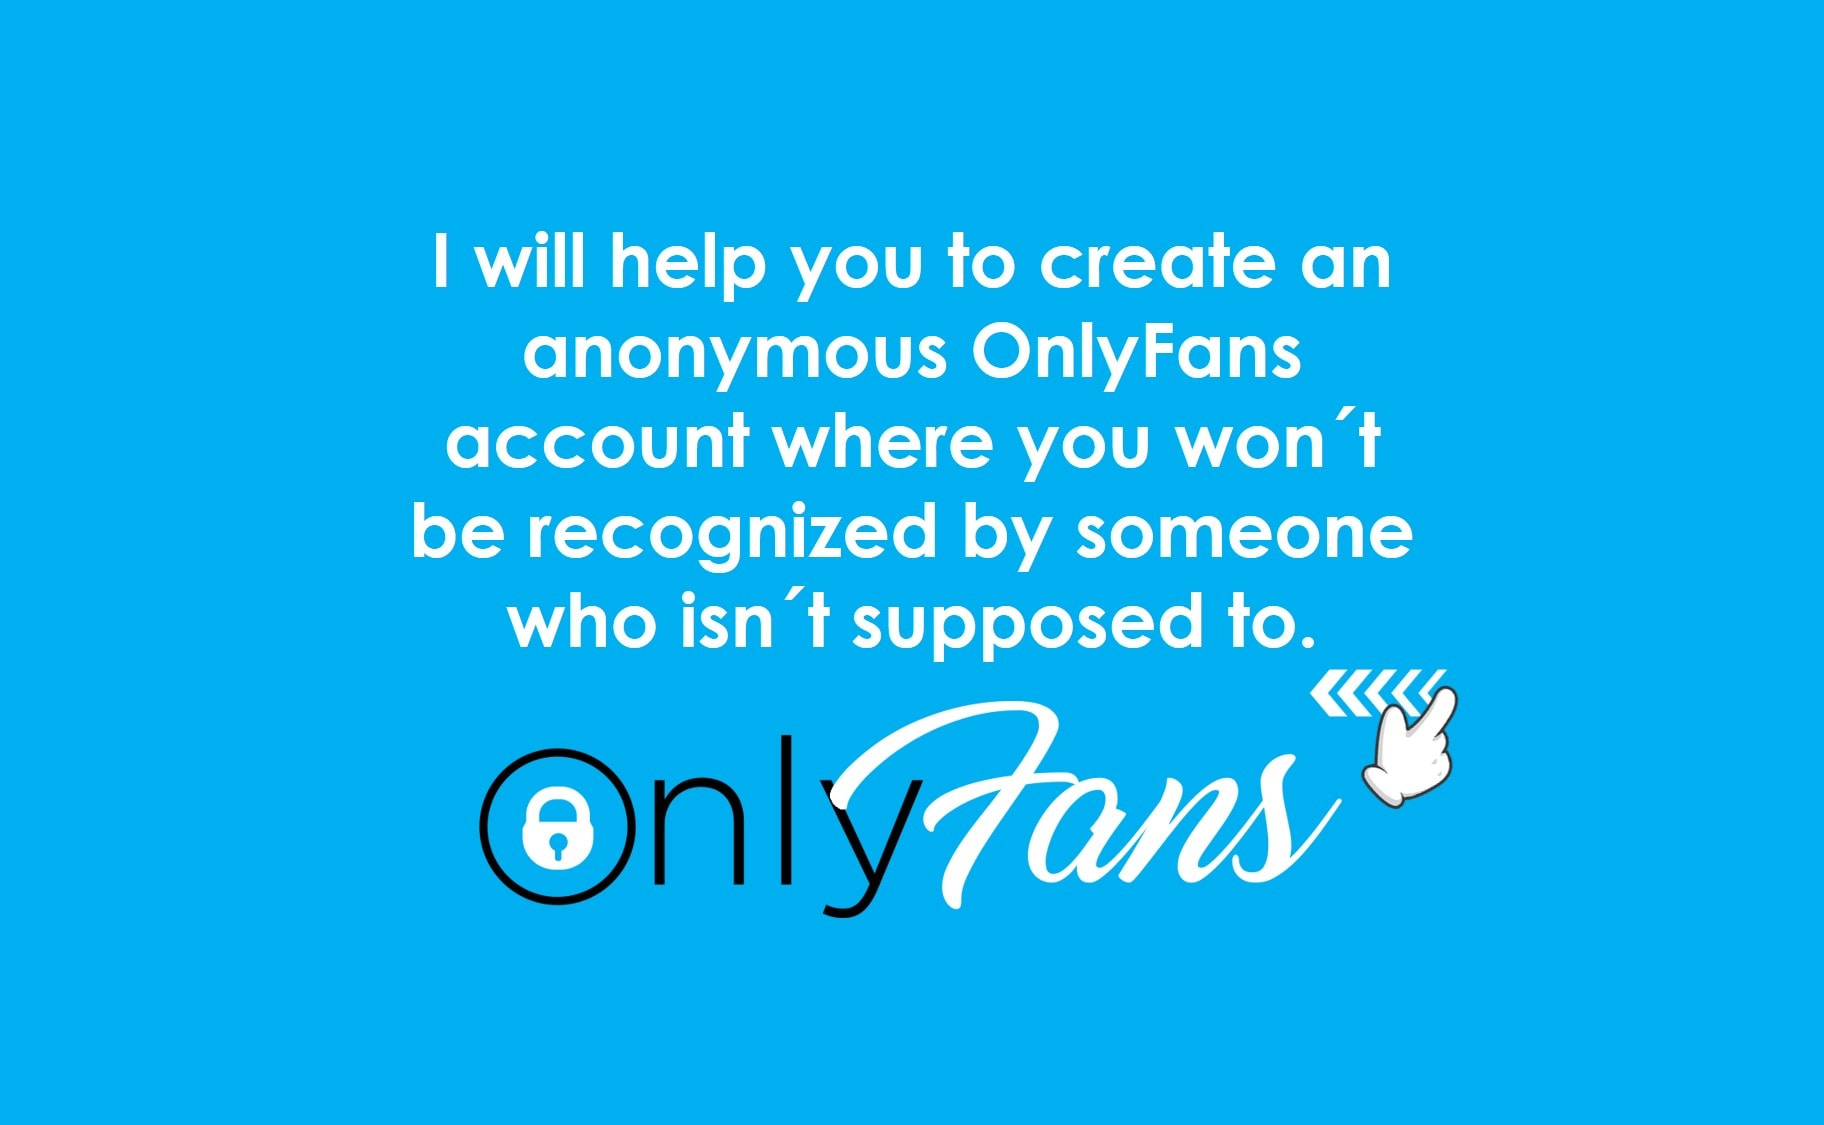 Subscribe to onlyfans anonymously